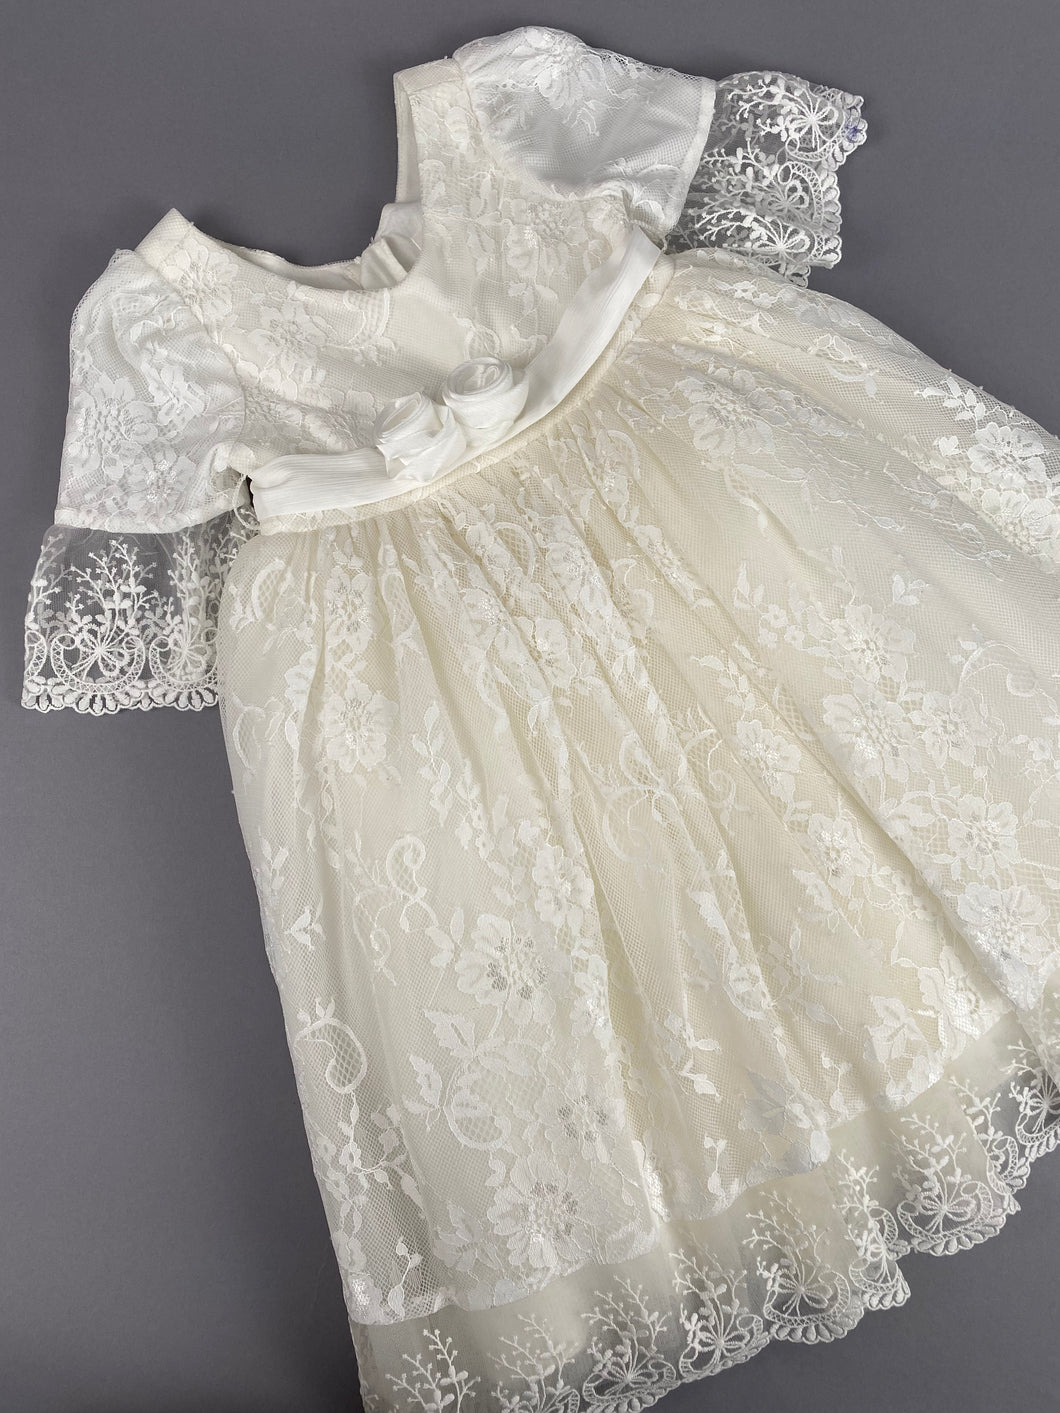 Dress 105 Girls Baptismal Christening French Lace Gown with Sleeves and Adjustable Belt. Made exclusively for Rosies Collections.